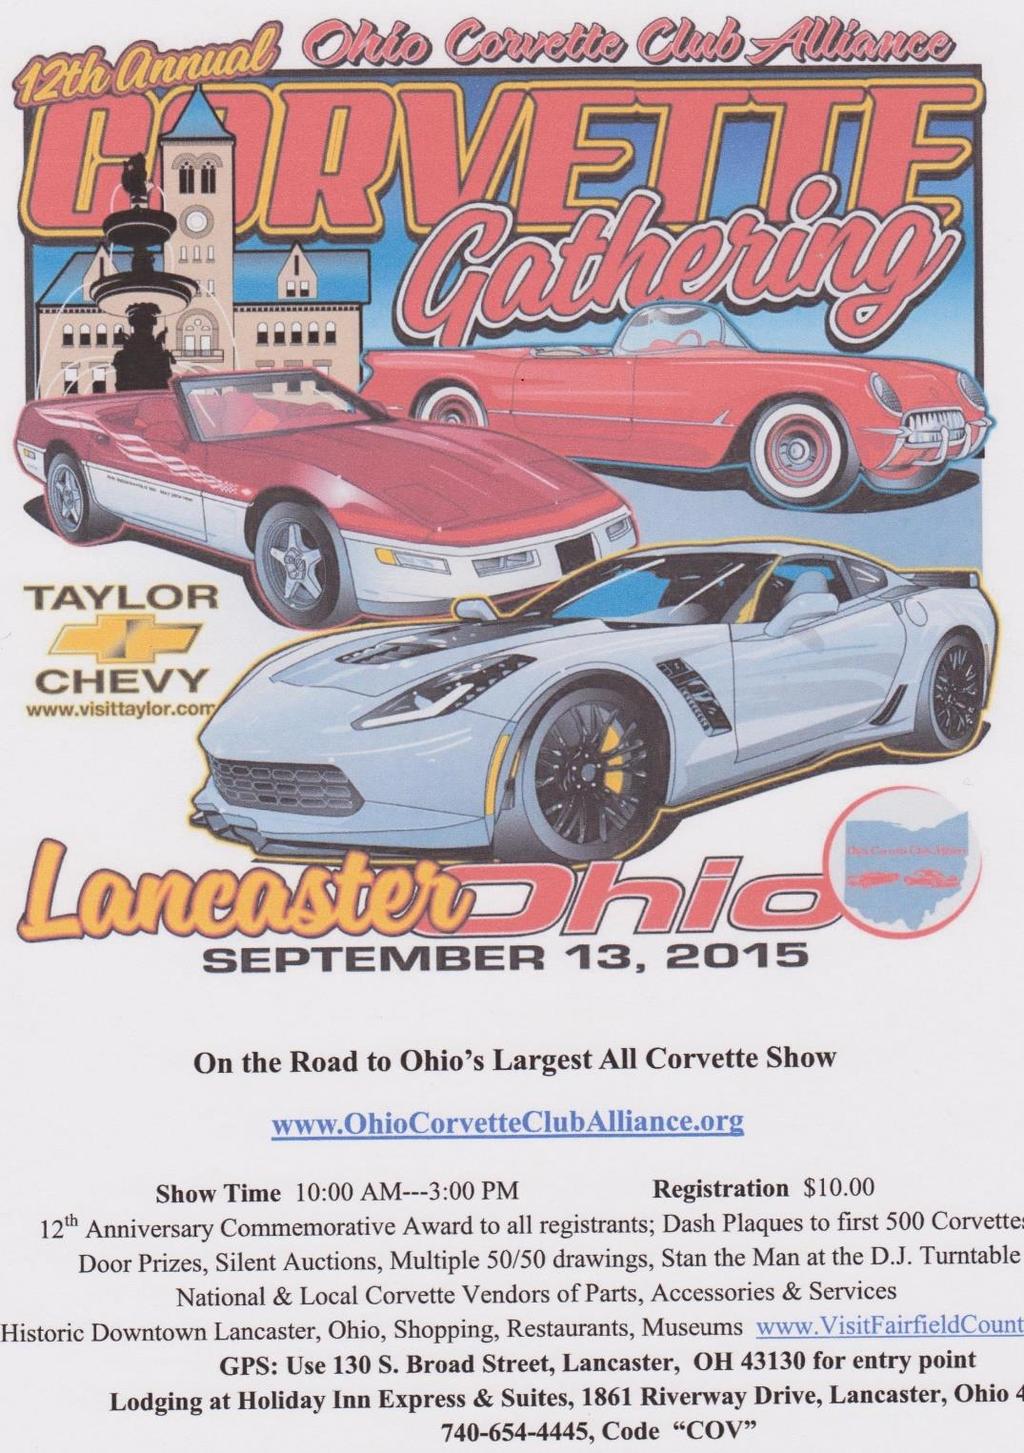 September All Corvette Gathering in Lancaster, Ohio As I mentioned at the February meeting I will be planning a 3 day trip to Lancaster, Ohio to attend the Ohio Corvette Alliance all Corvette